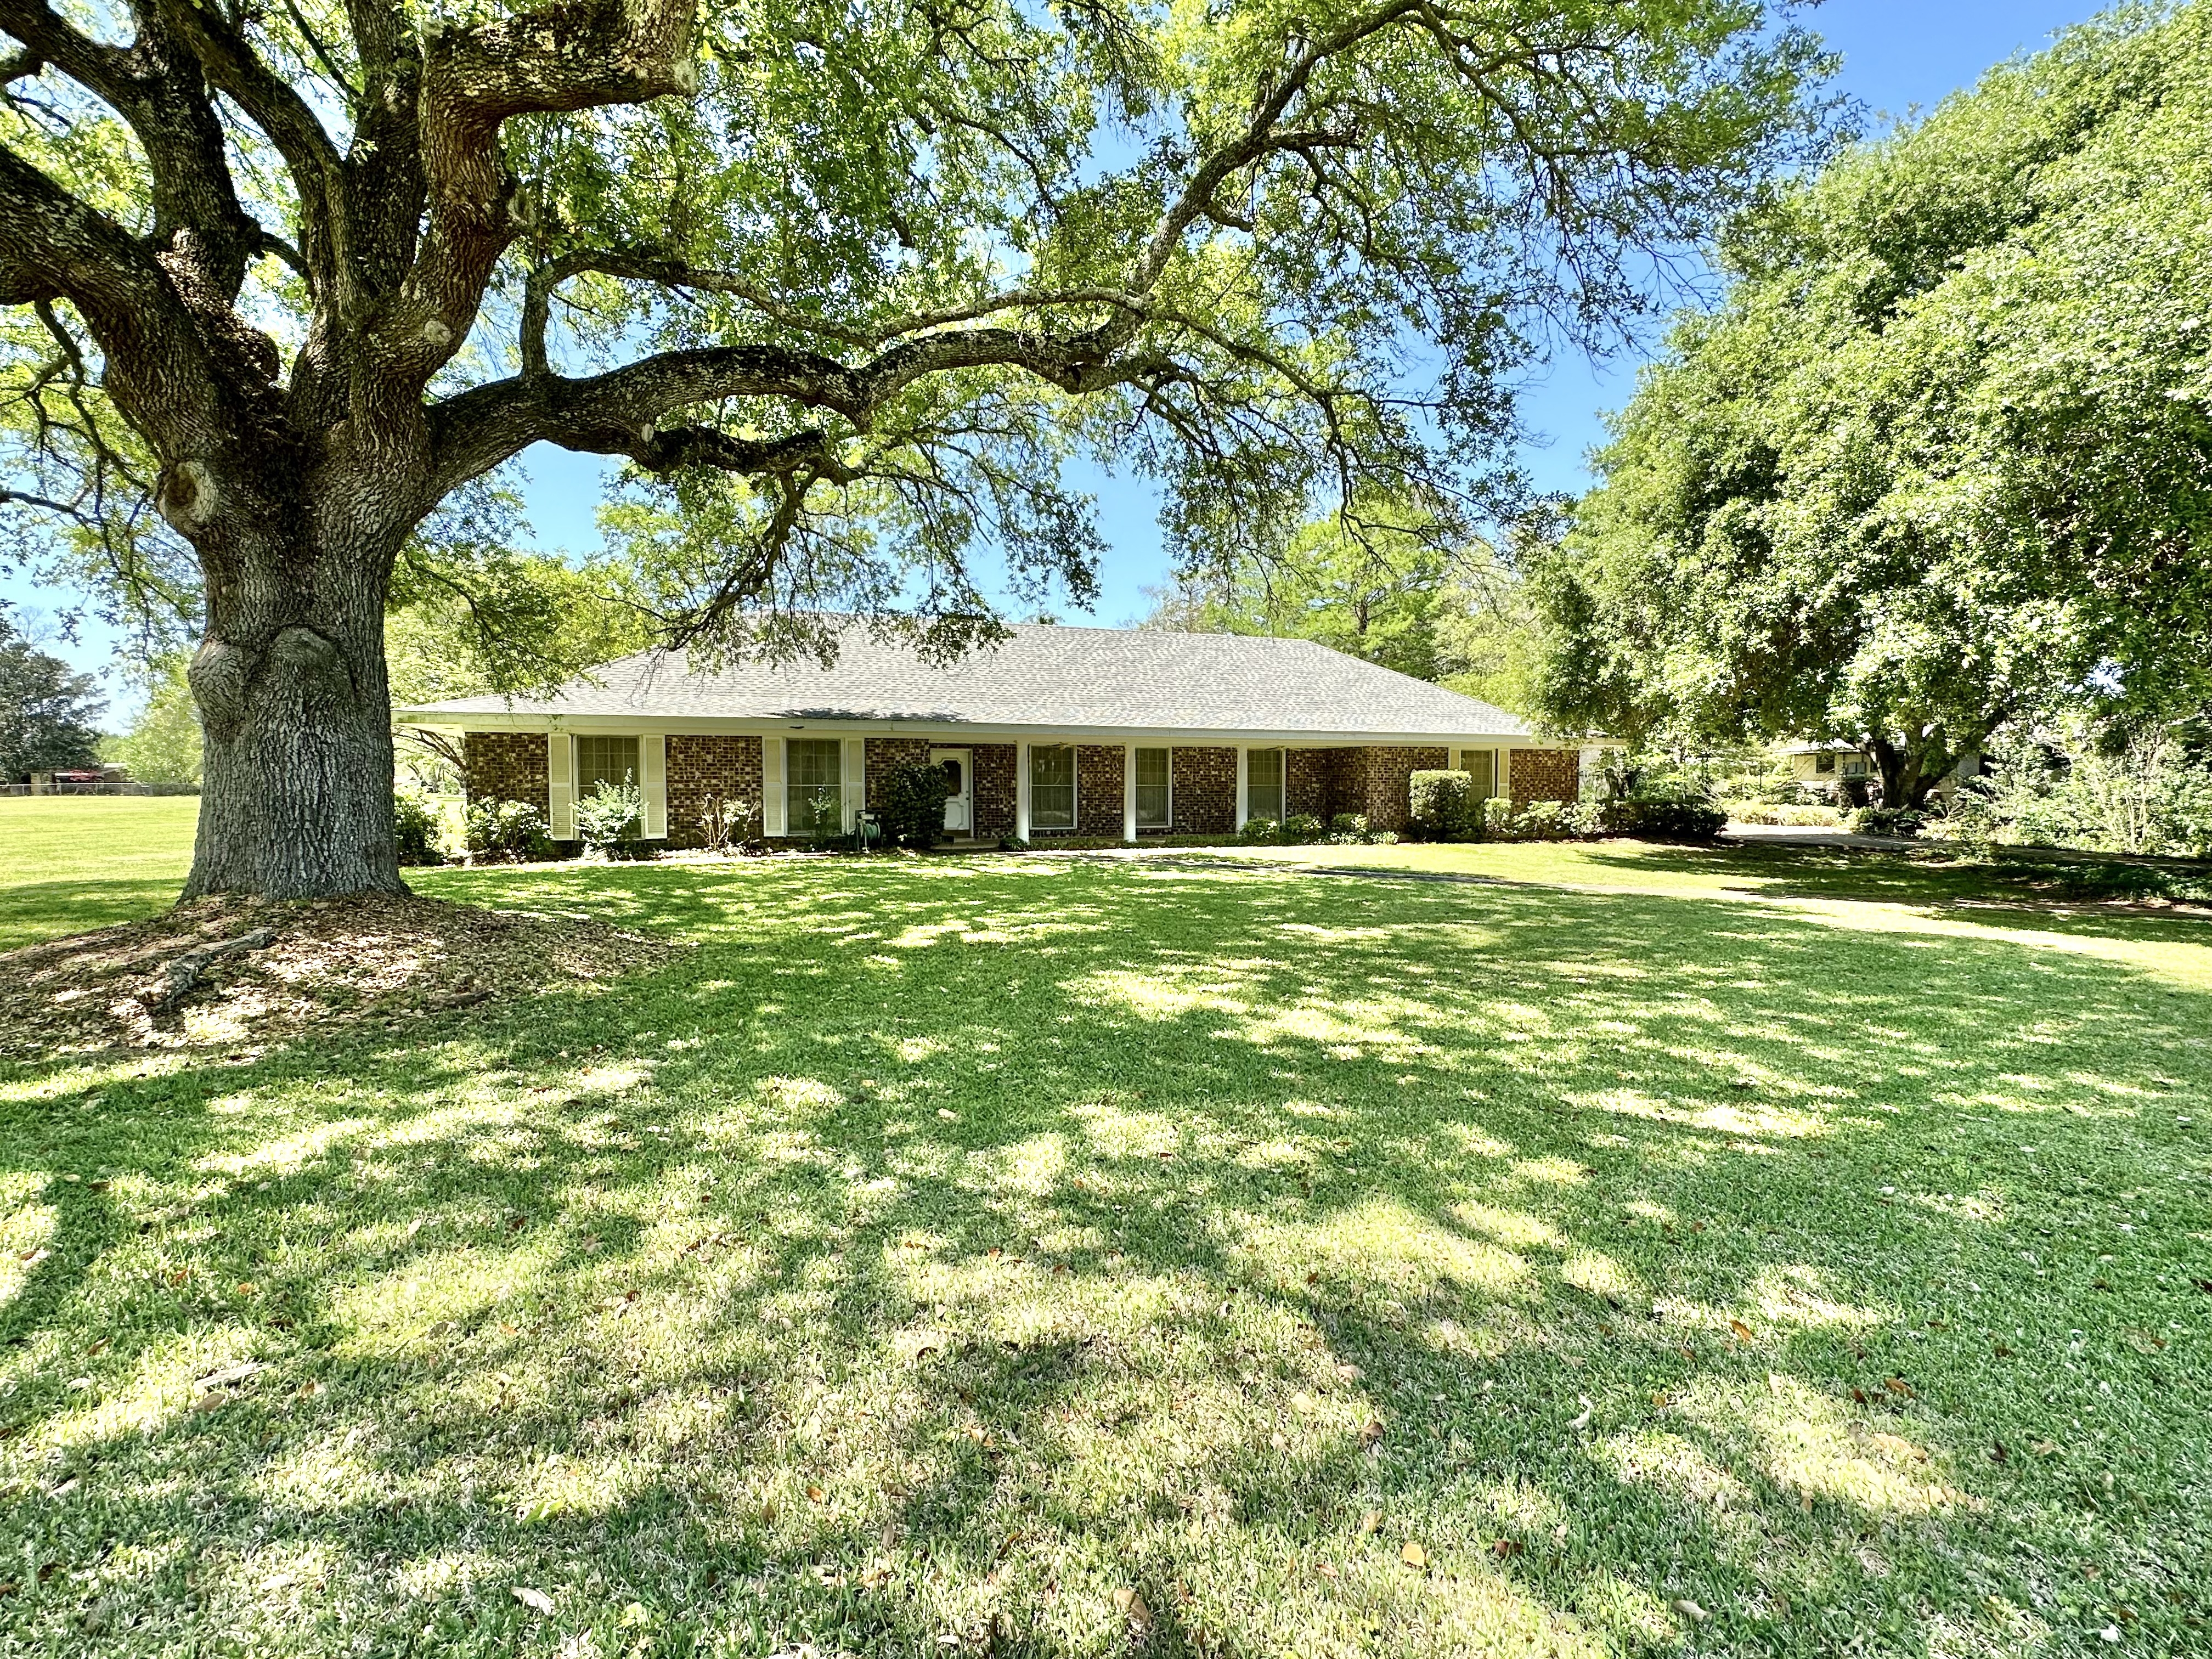 Traditional Home on 1 ± Acre - Bunkie, LA